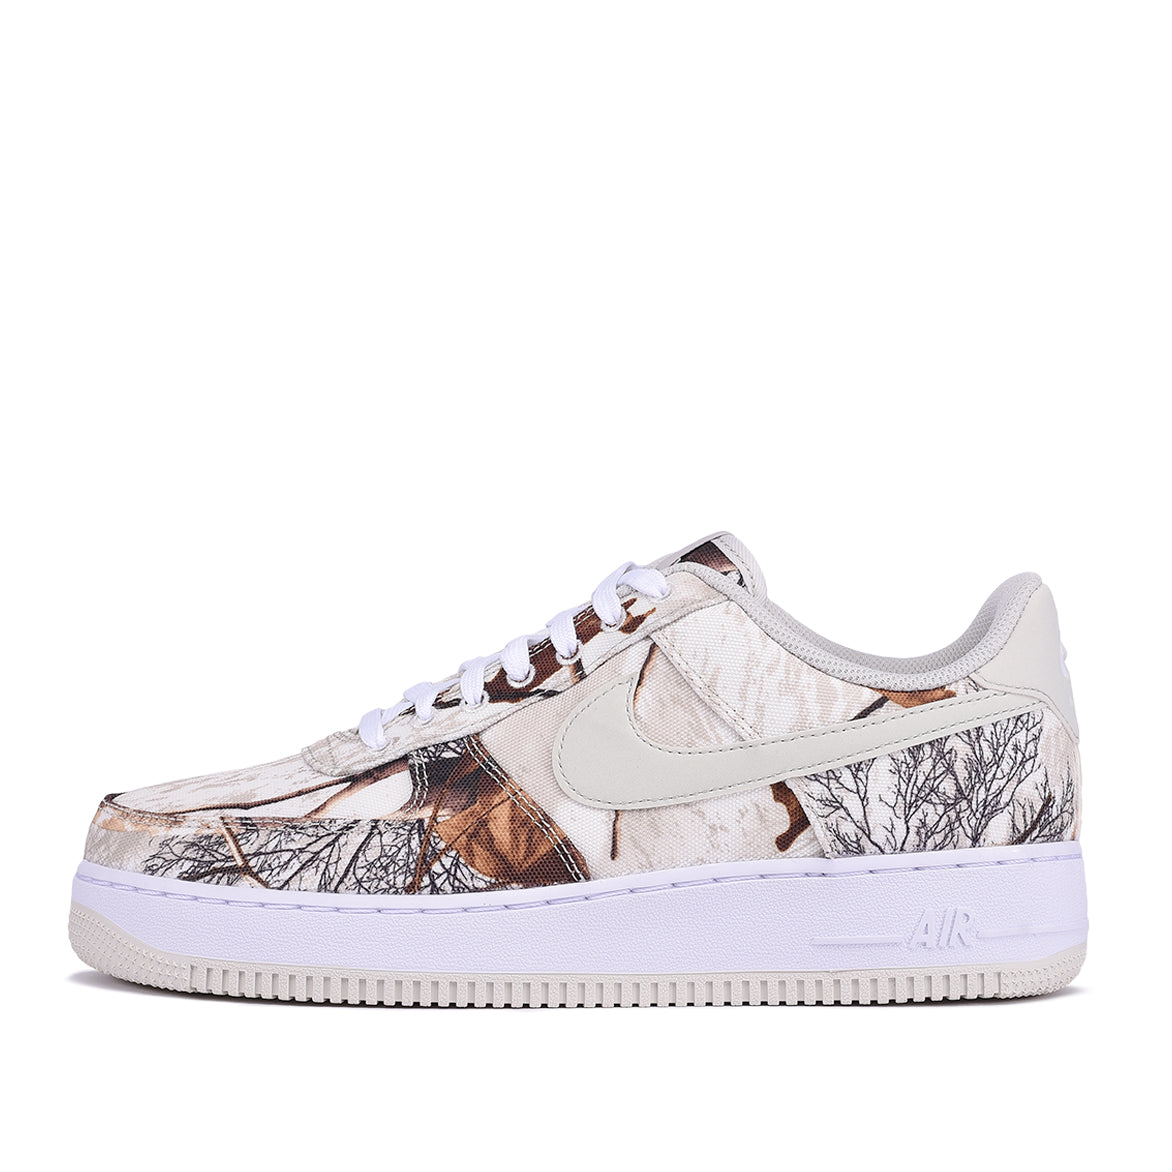 realtree air force 1 white